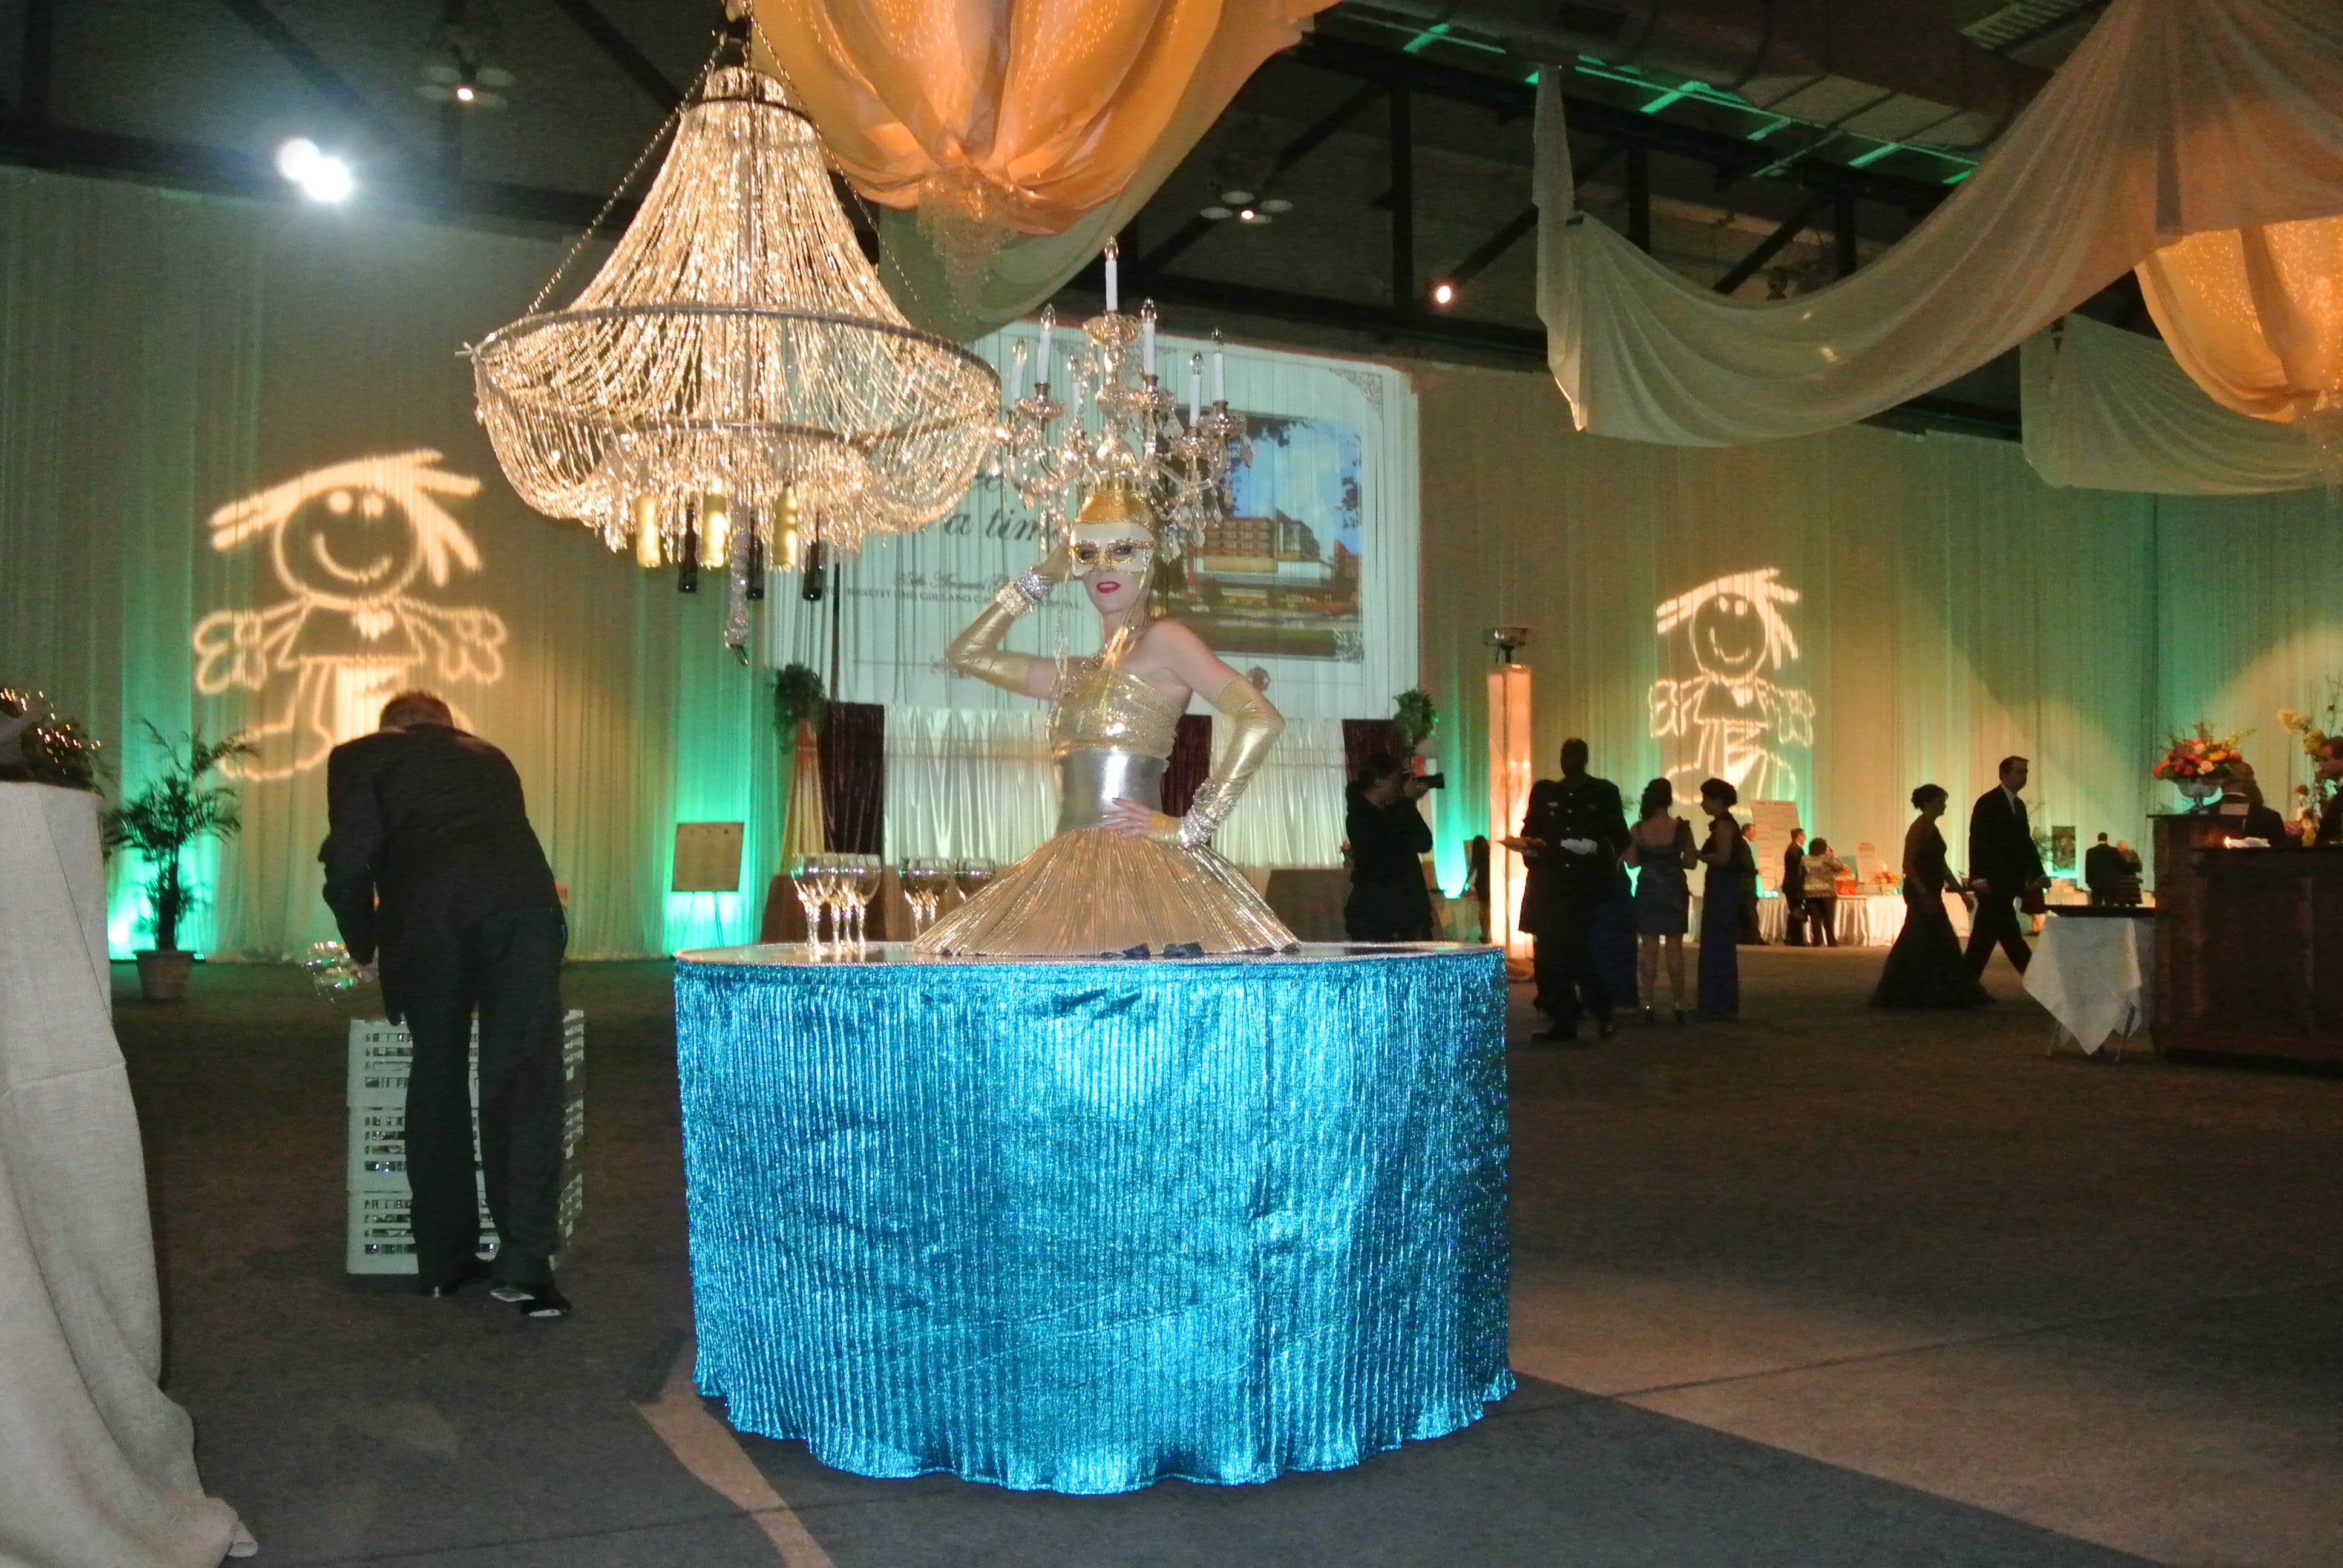 Corporate Christmas Party Entertainment Ideas
 Last Minute Planning Holiday Party Ideas event